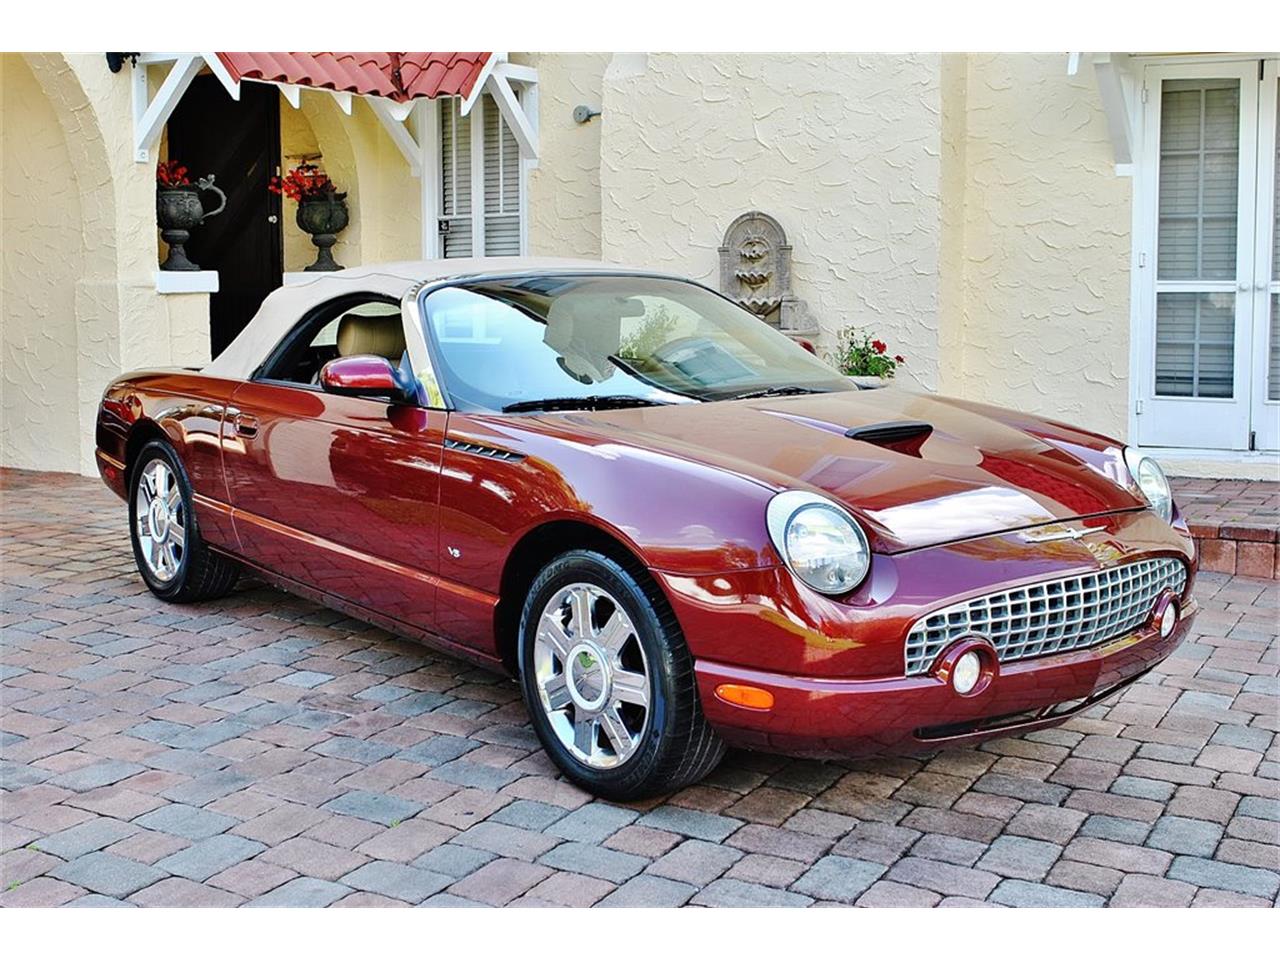 2004 ford thunderbird pacific coast roadster